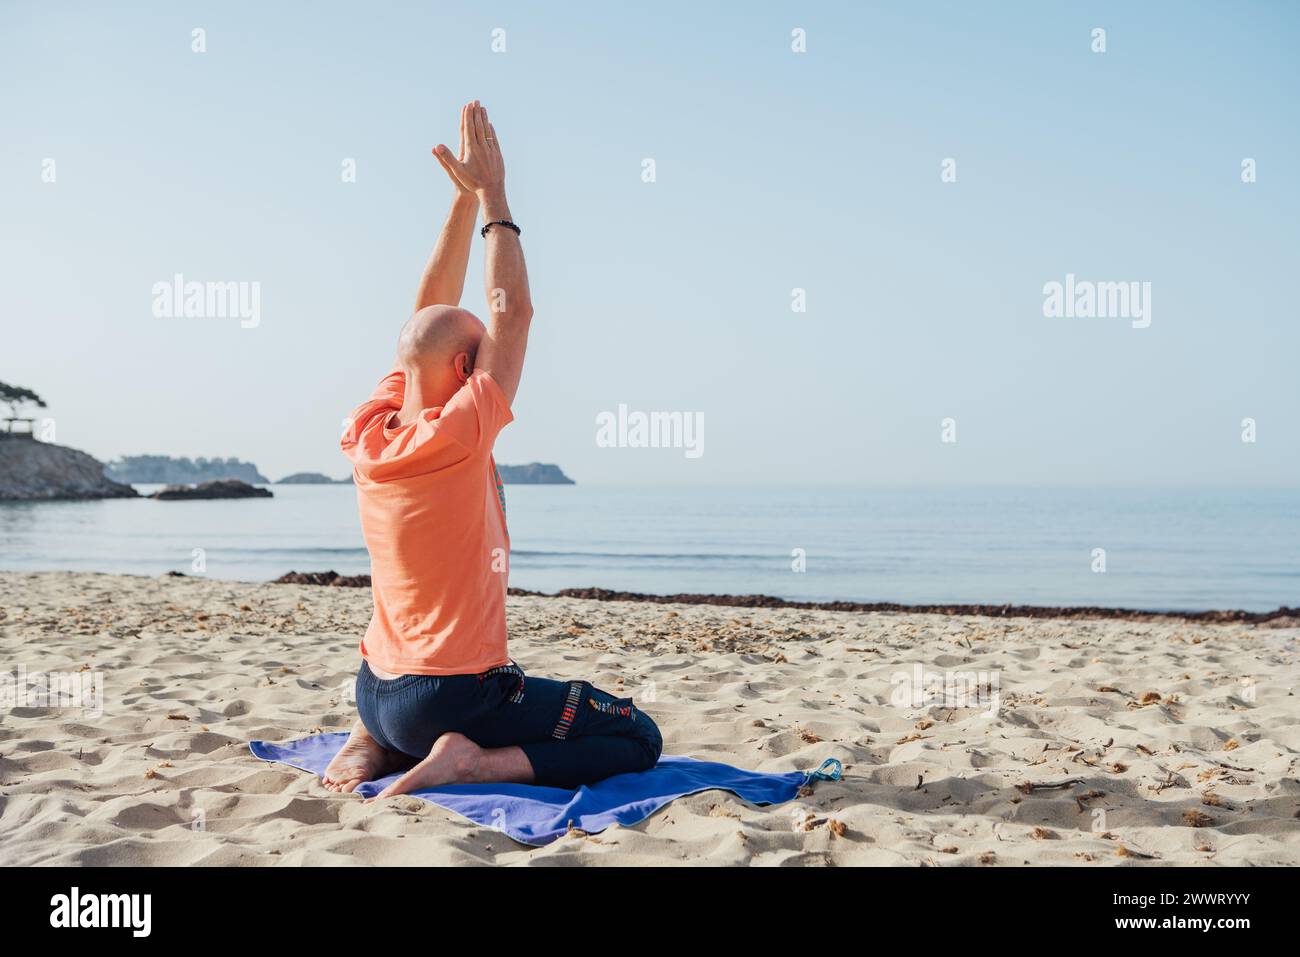 Calm man sitting in Seiza position, doing deep breathing exercises and meditating in early morning hours on the sandy beach with calm sea waves. Menta Stock Photo